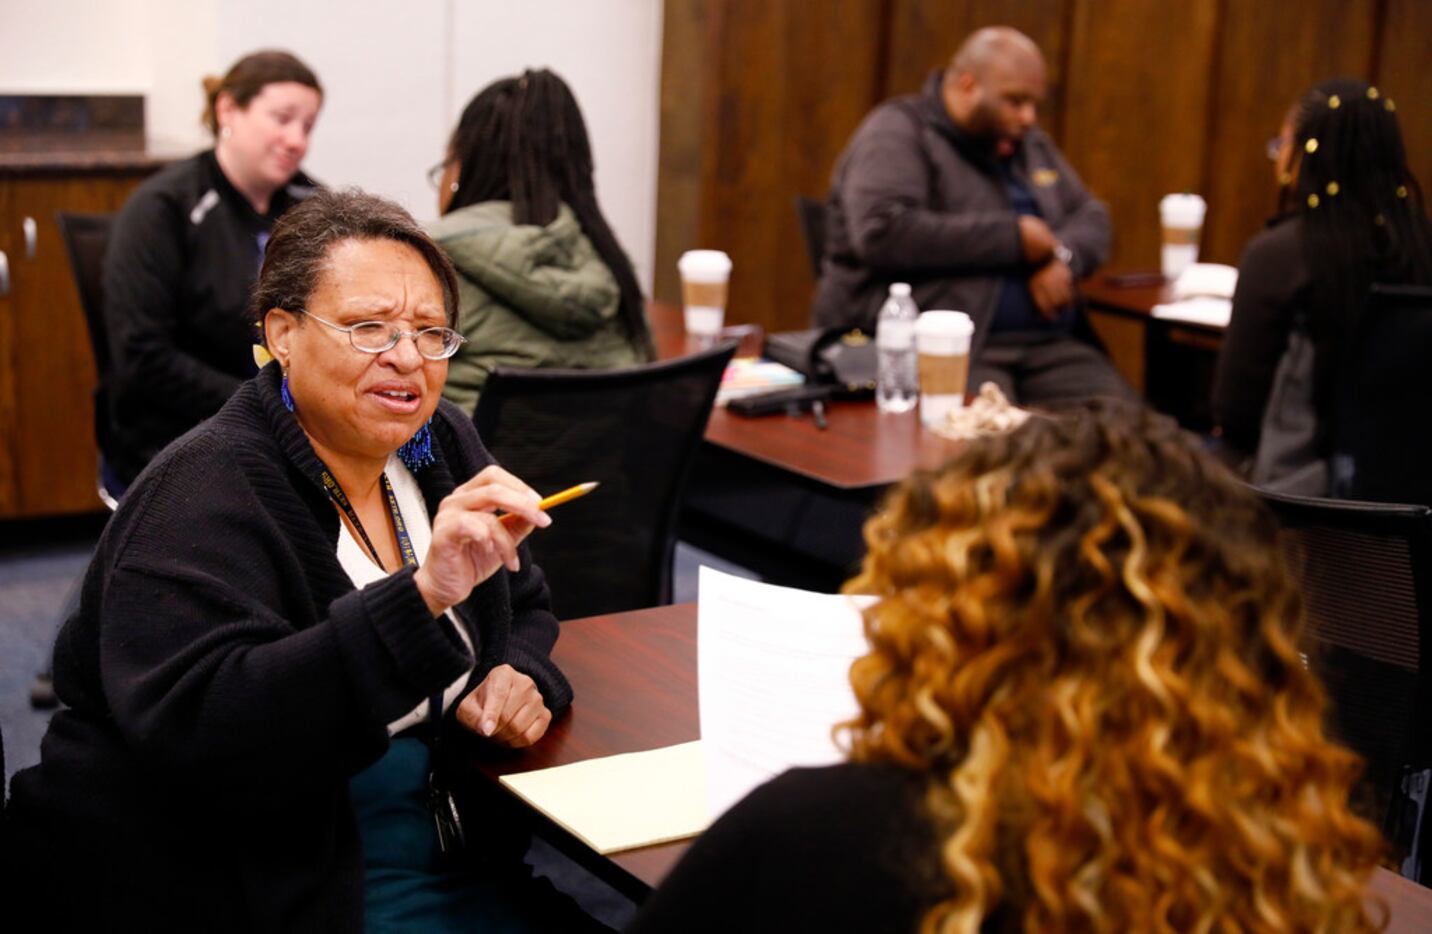 Texas A&M Commerce staff members Terryl Bratek (left) role play a conversation with...